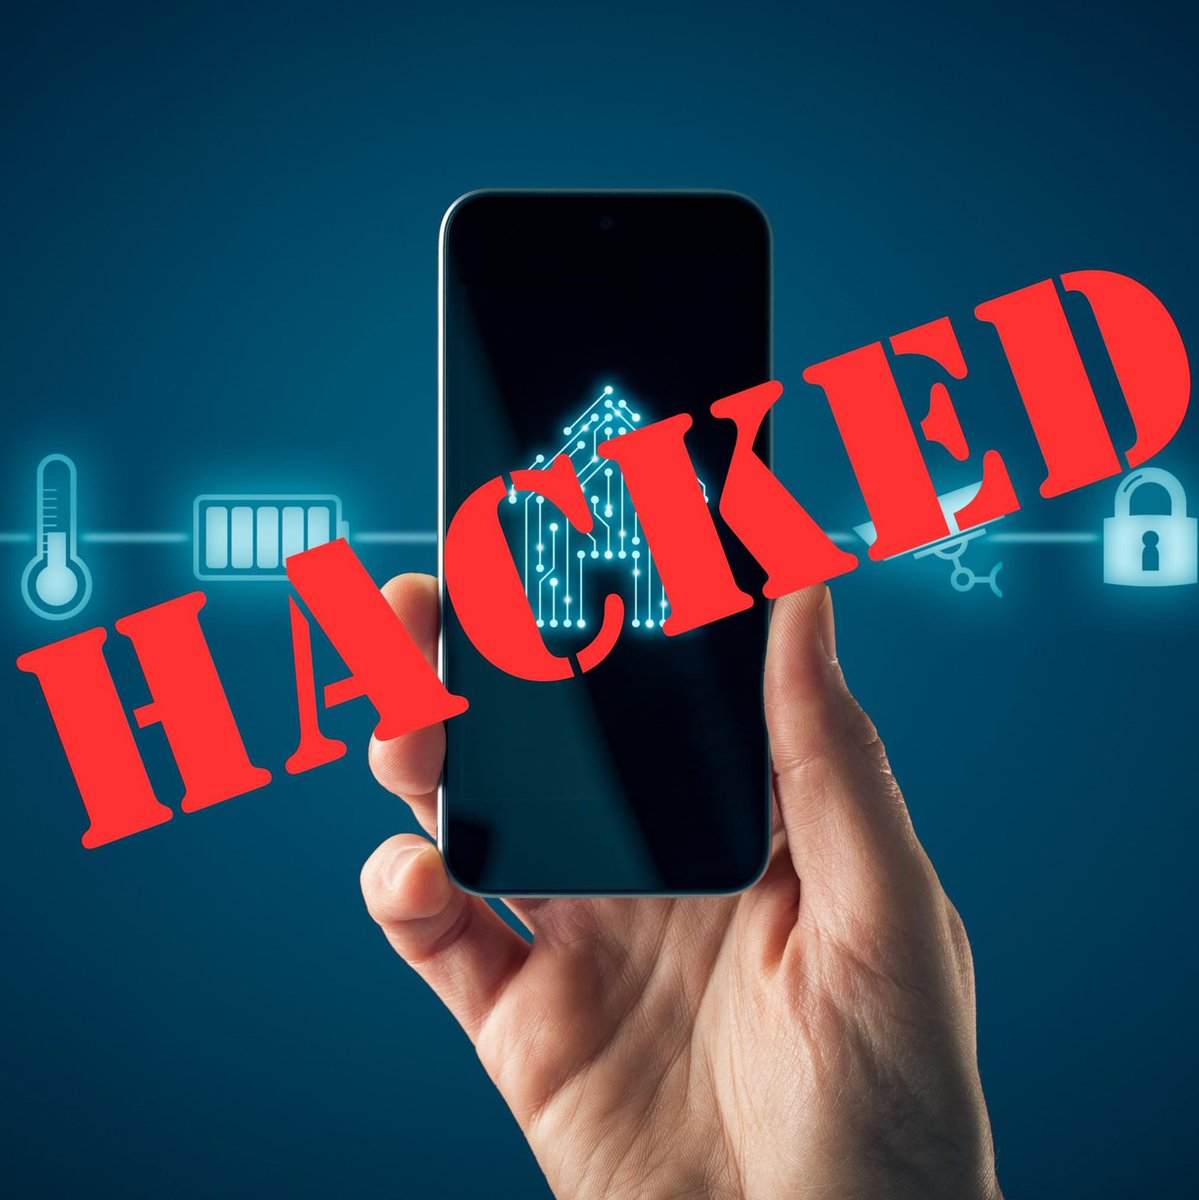 Is your smart home feeling a bit off? Read our latest blog (tinyurl.com/mrx5evd3) for the 9 signs that may indicate your devices have been hacked. 

#alphaoneops #Cybersecurity #informationsecurity #SmartHomeSecurity #CyberAwareness #TechSafety